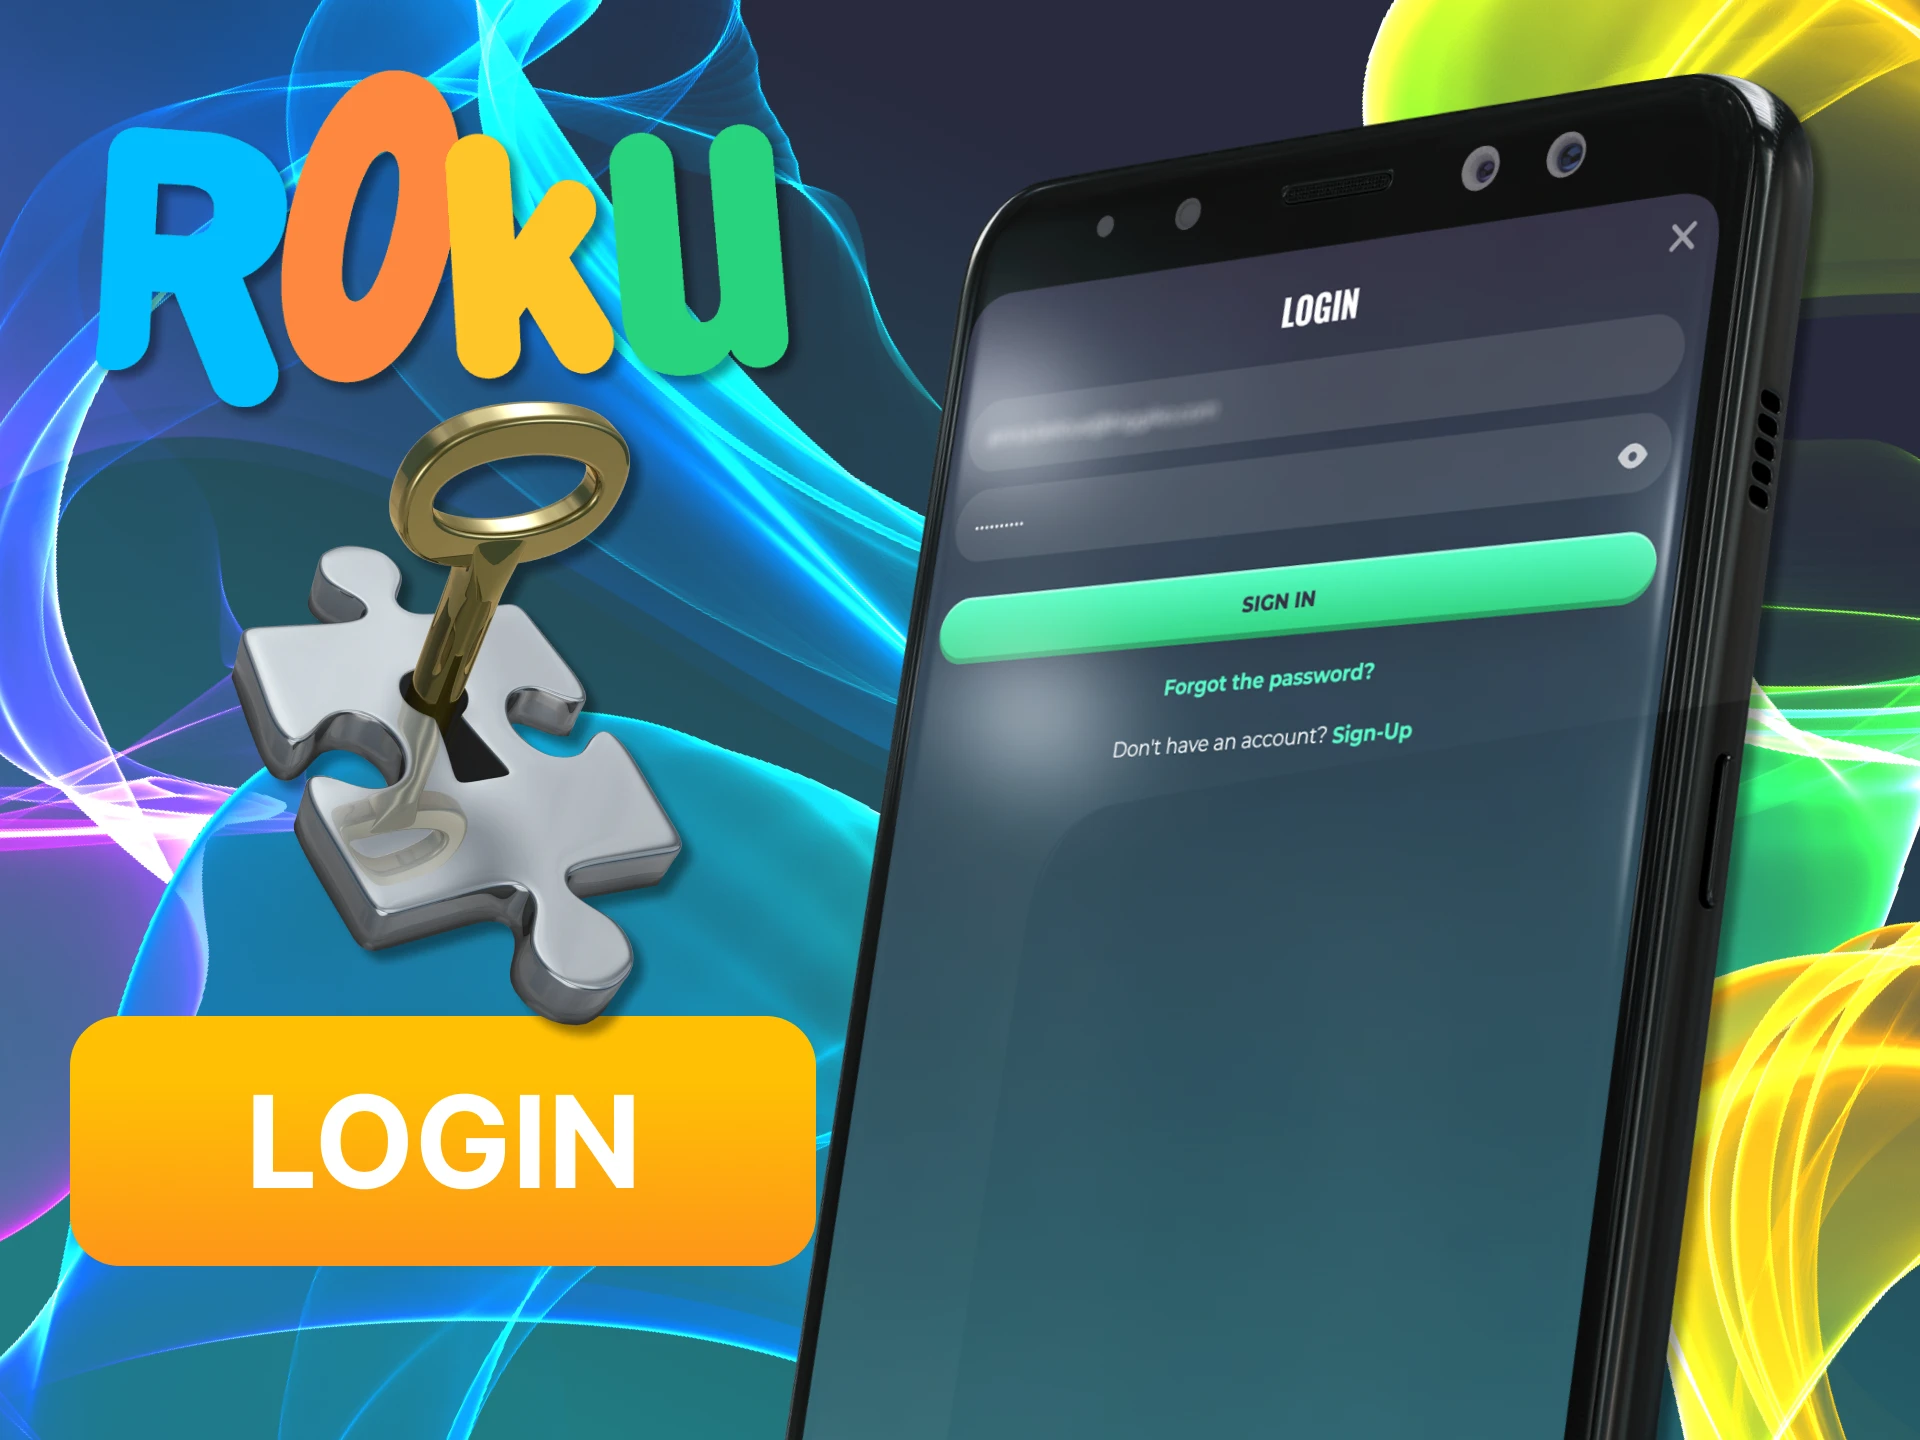 Log in to your account on the Rokubet app and get access to all the features.